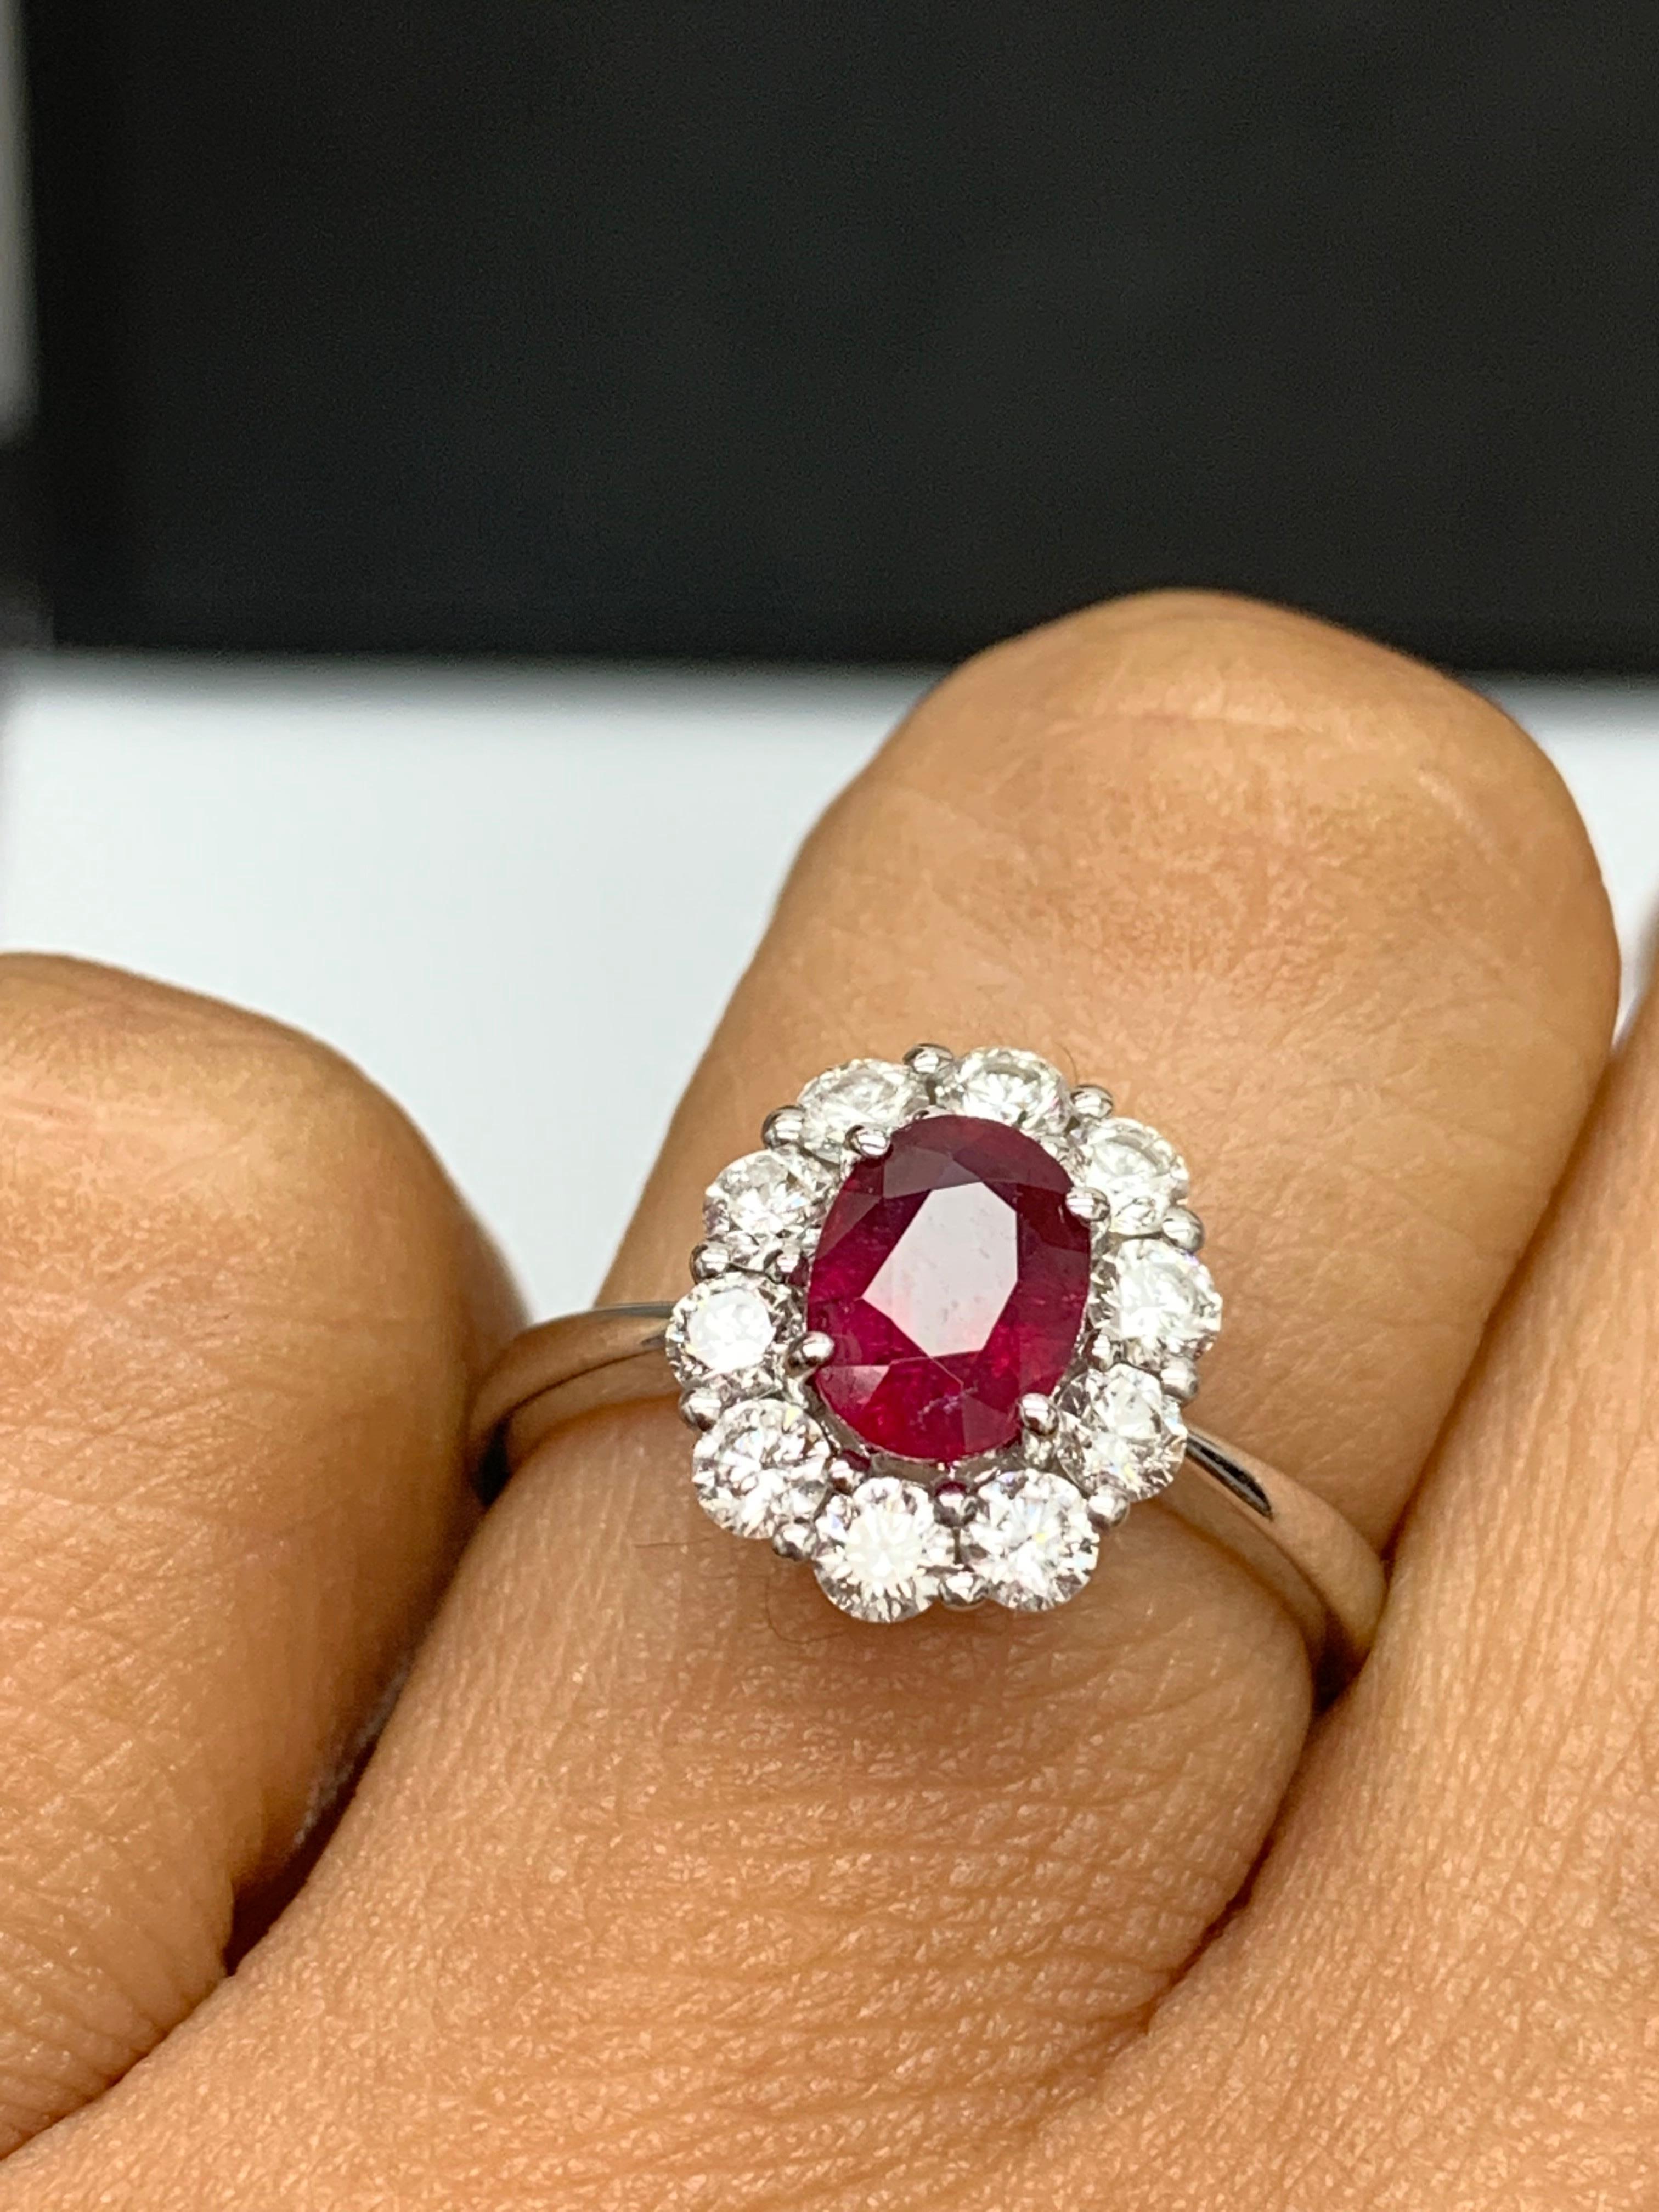 Modern 0.92 Carat Oval Cut Ruby and Diamond Ring in 18k White Gold For Sale